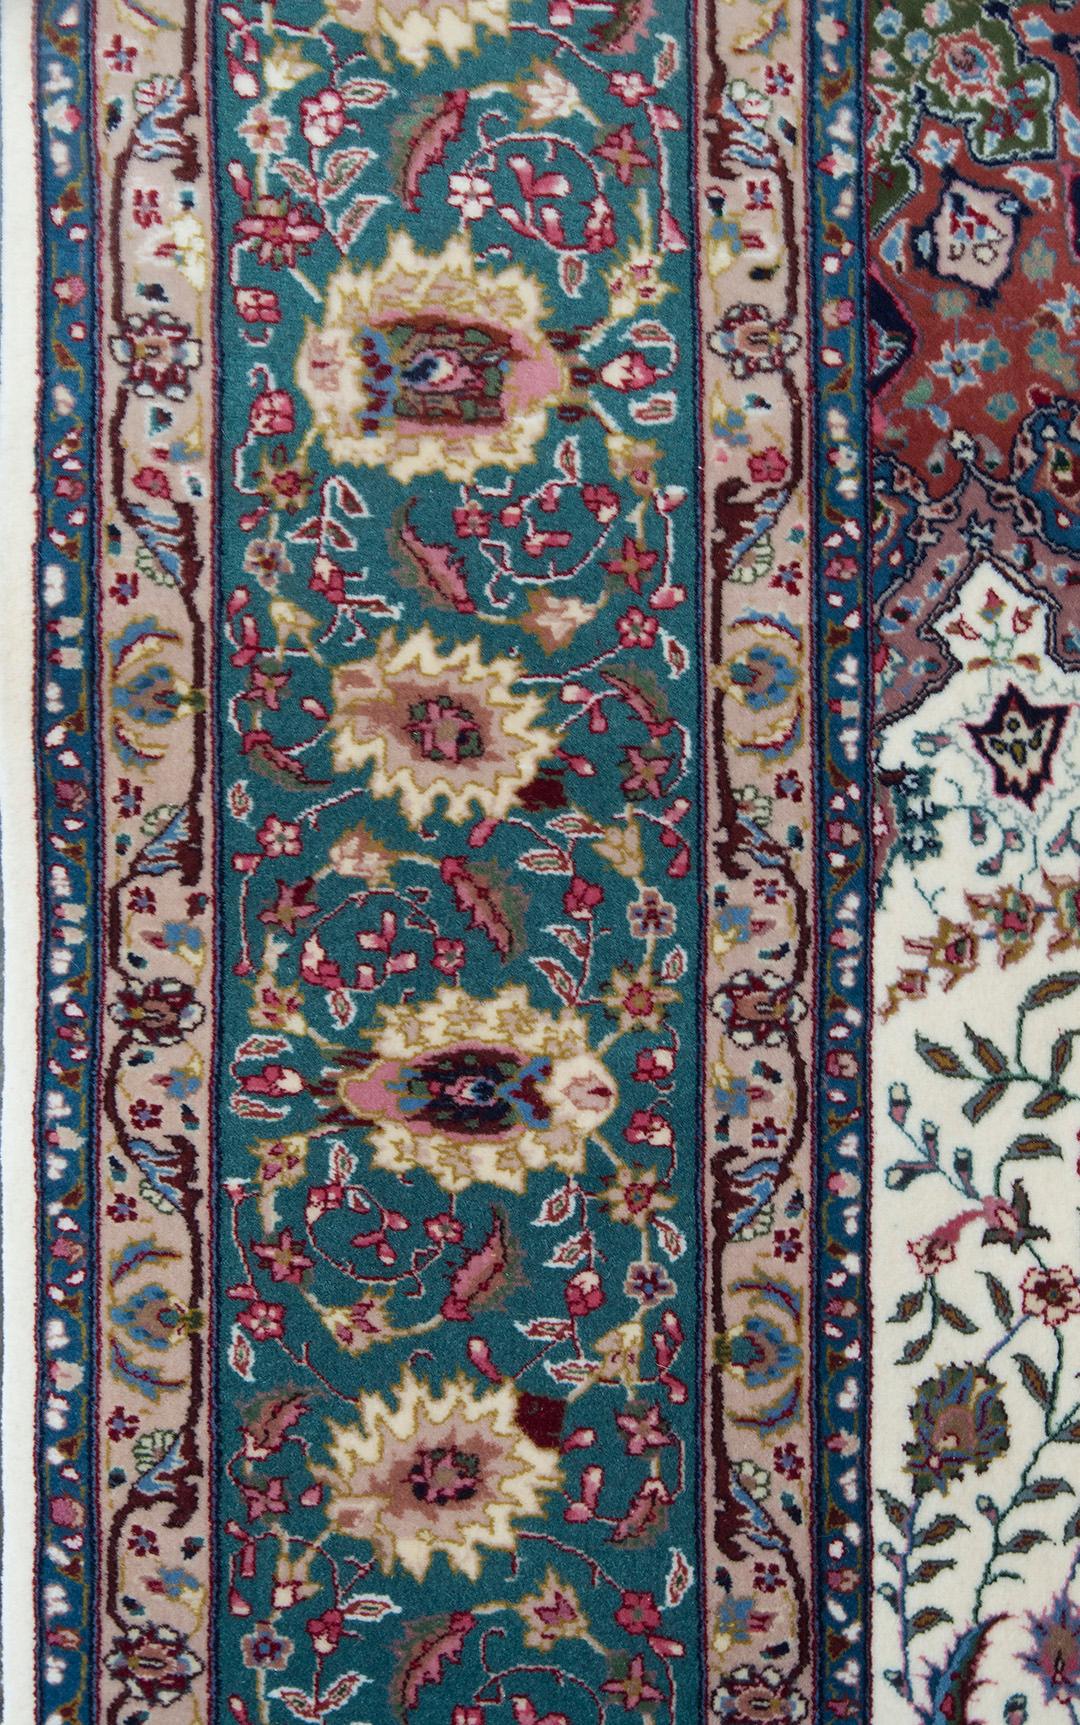 Brand new Tabriz from China woven by master weavers, this beautiful rug features an exceptional workmanship and a masterful color combination. 100% Fine natural wool pile.